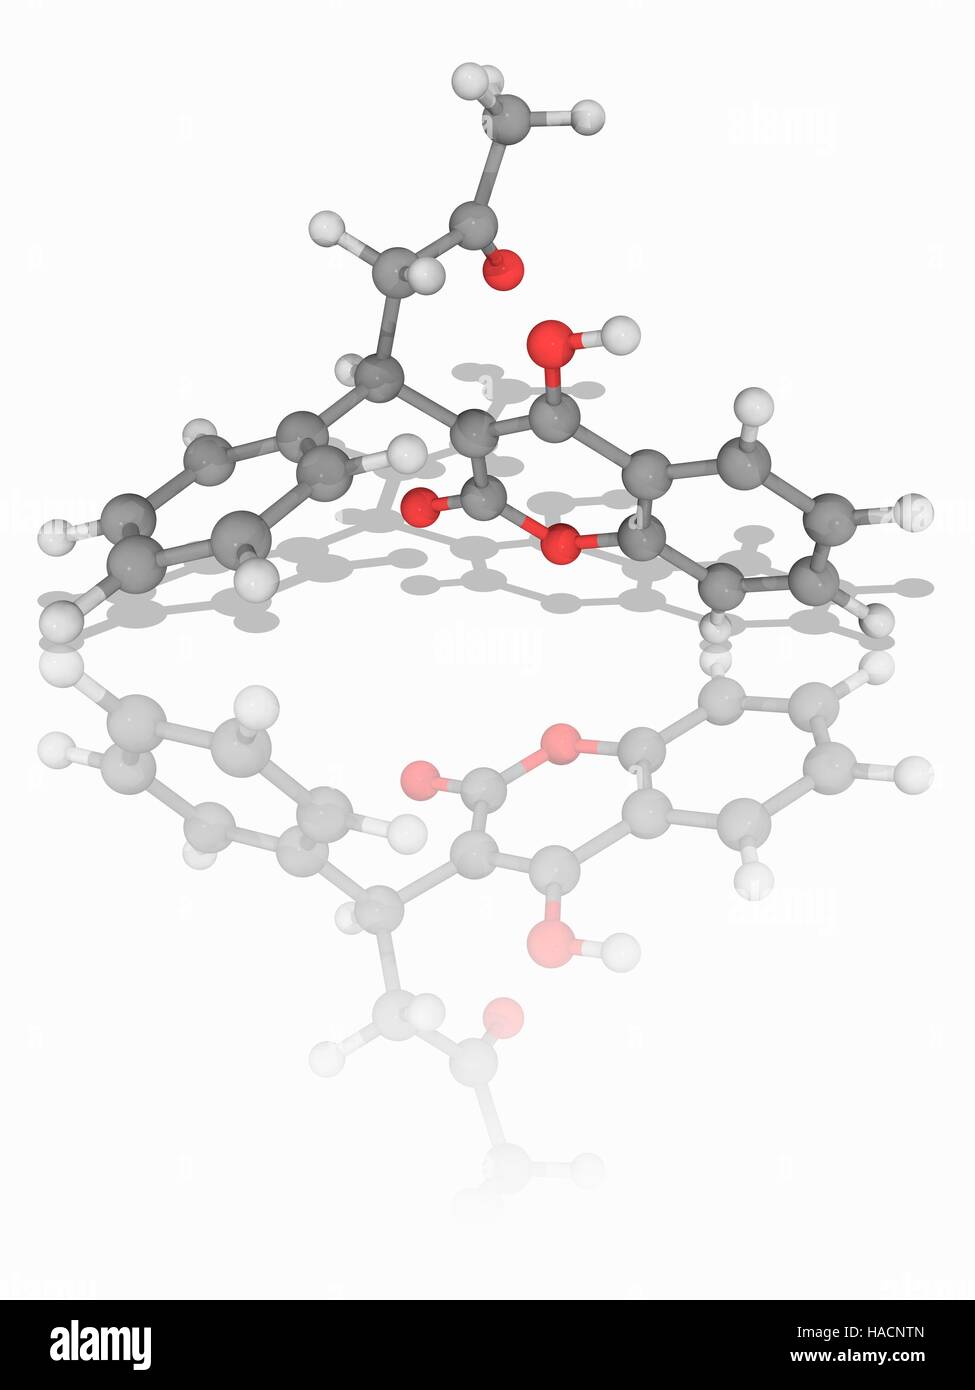 Warfarin. Molecular model of the drug warfarin (C19.H16.O4), used as an anticoagulant. Trade names include Coumadin, Jantoven, and Marevan. Atoms are represented as spheres and are colour-coded: carbon (grey), hydrogen (white) and oxygen (red). Illustration. Stock Photo